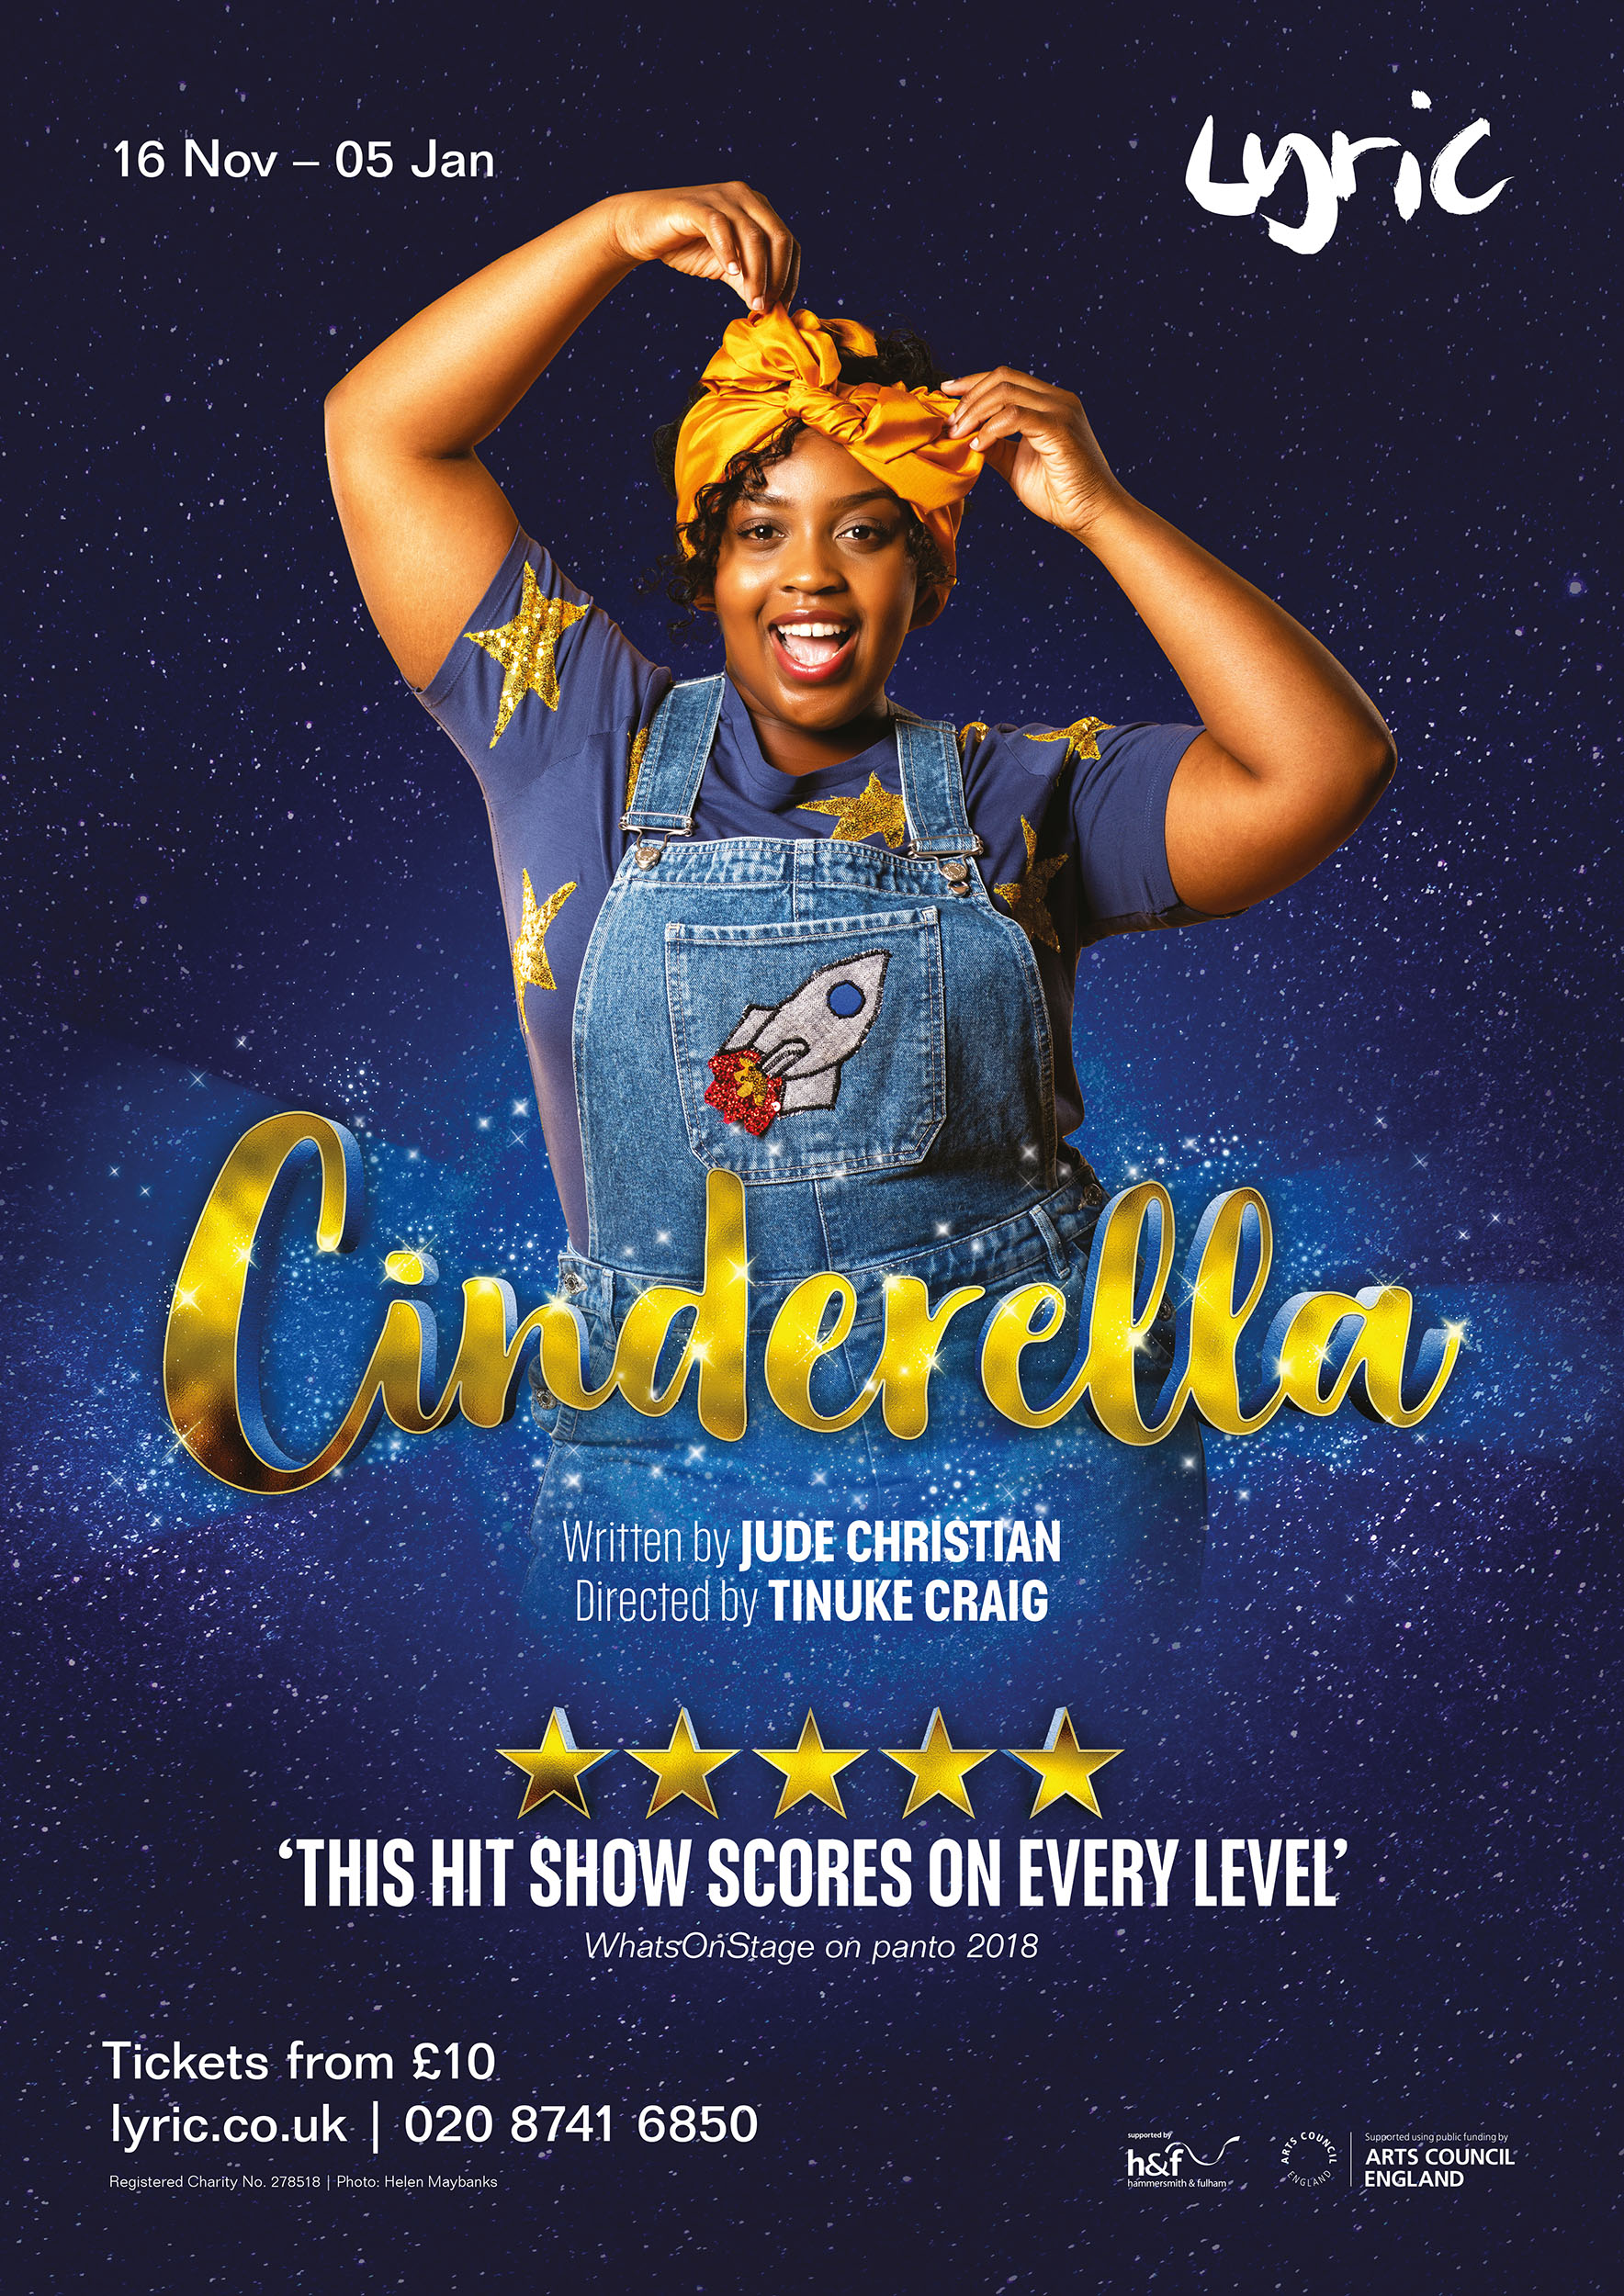 Poster of Timmika Ramsay as Cinderella for the Lyric Hammersmith's panto. Photography copyright Helen Maybanks 2019